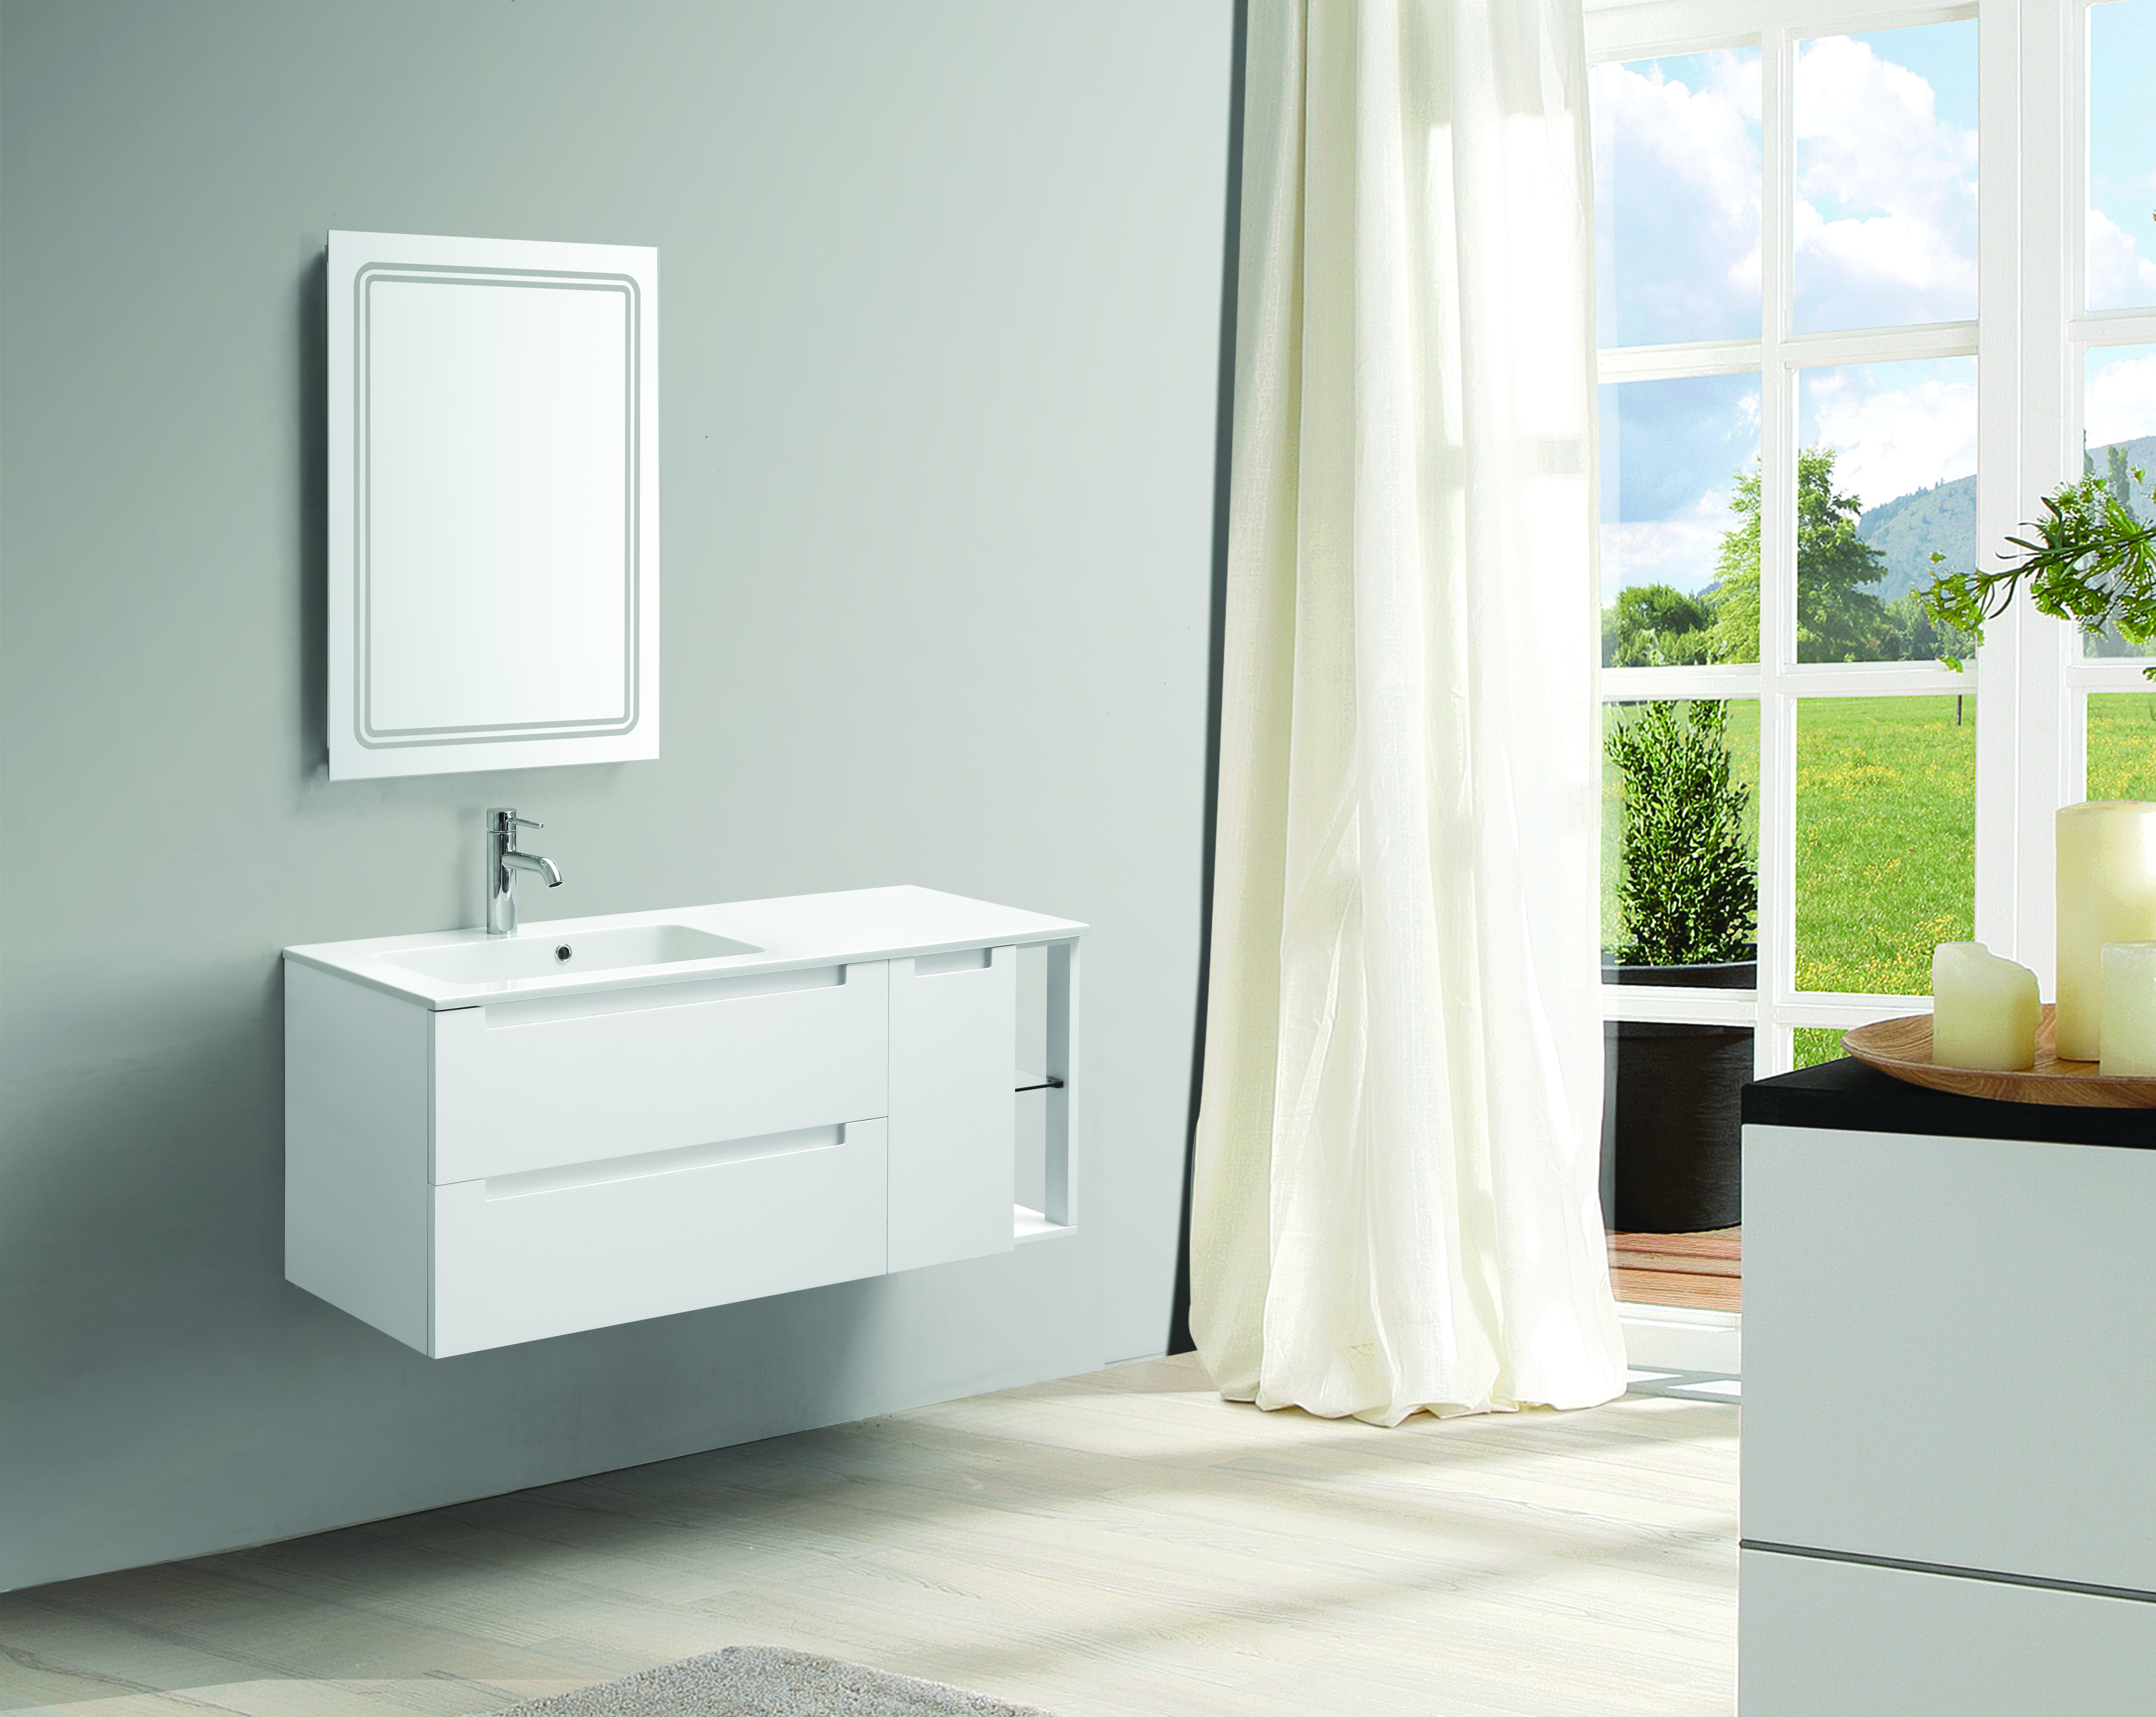 Wall Mounted Bathroom Cabinet White Color With 2 Doors and 2 Drawers